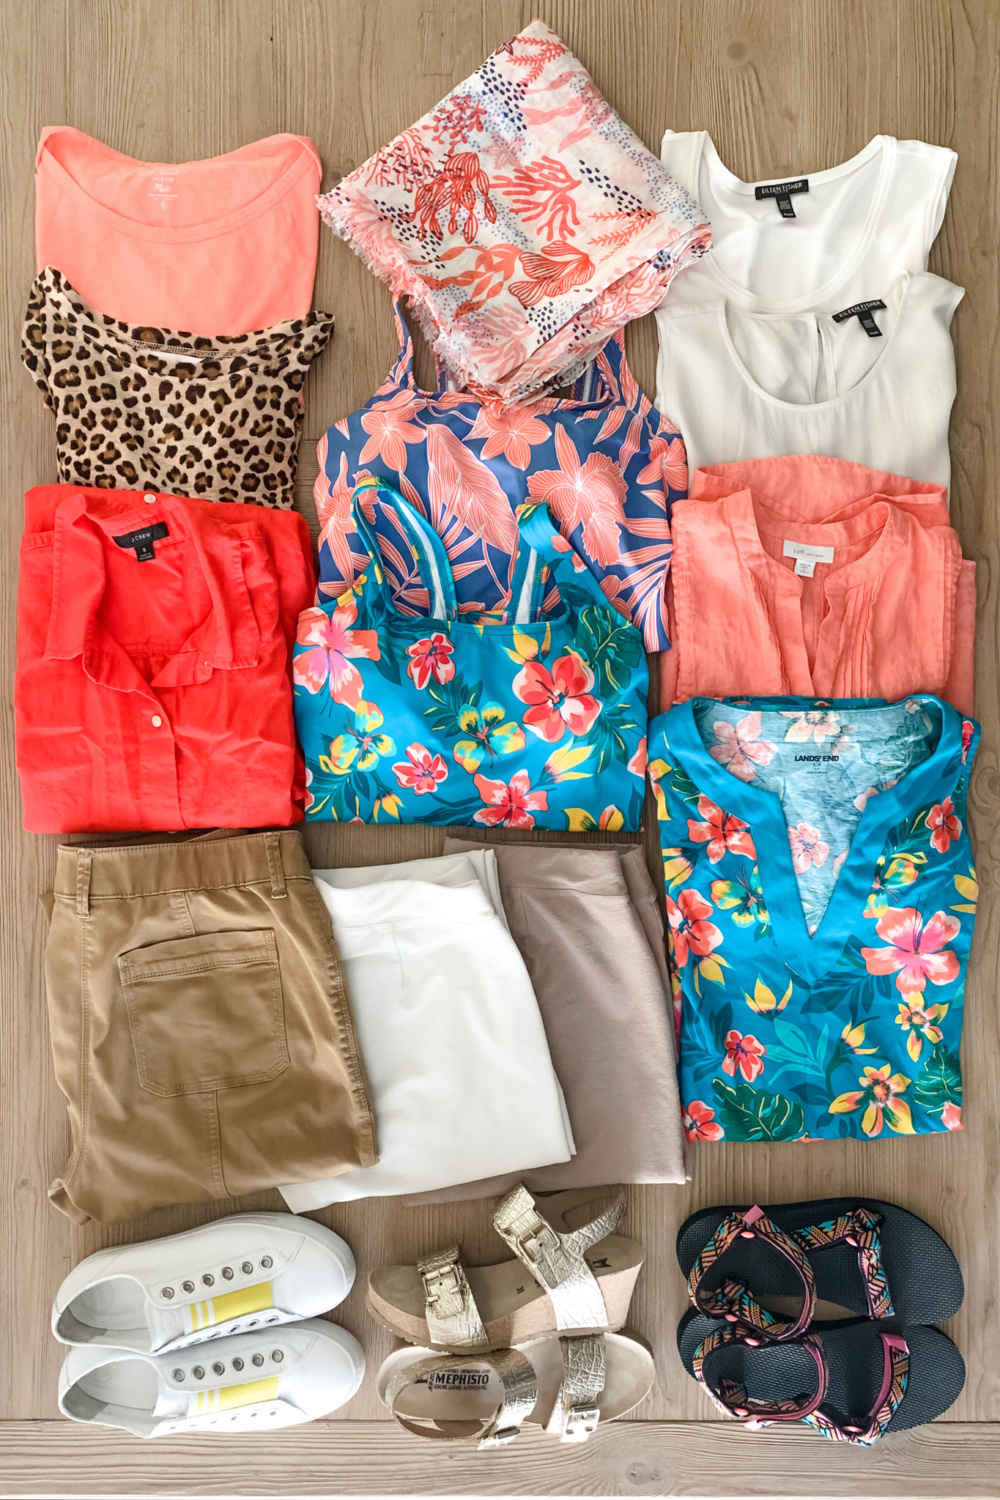 My beach vacation packing list for Mexico. Details at une femme d'un certain age.